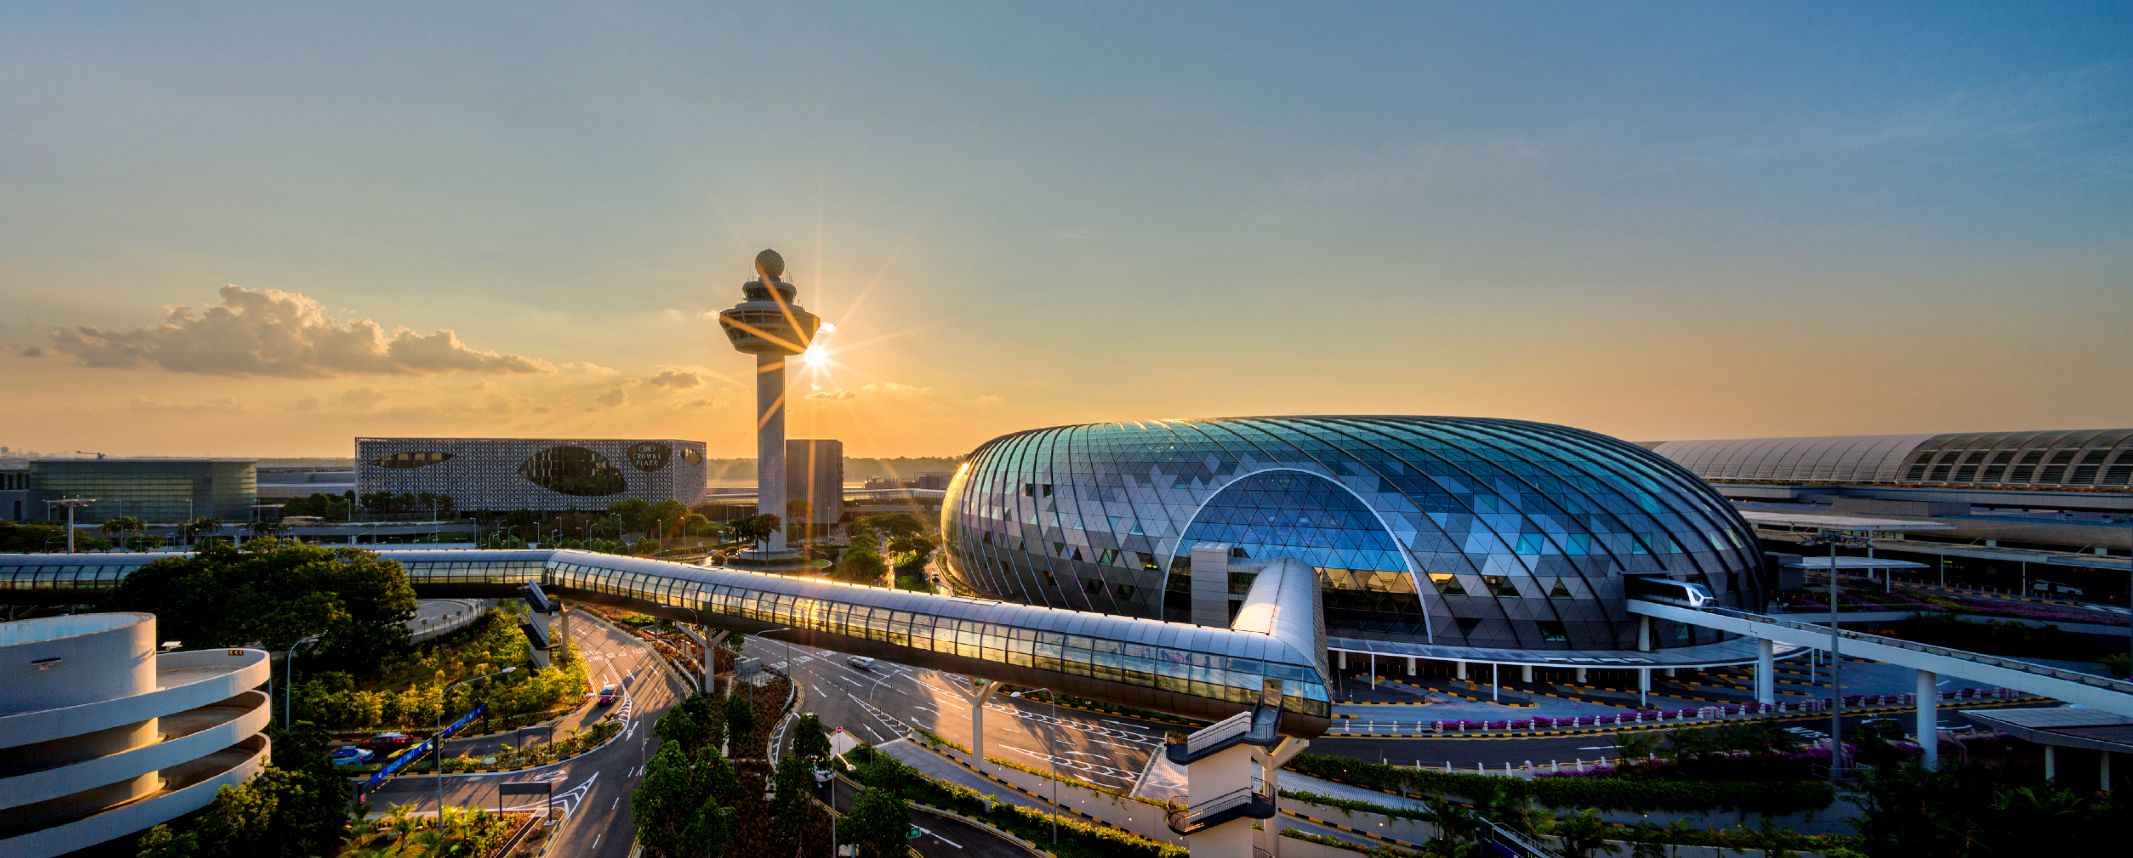 Changi Airport links Singapore to over 120 cities globally, with over 80 airlines operating more than 4,000 weekly flights